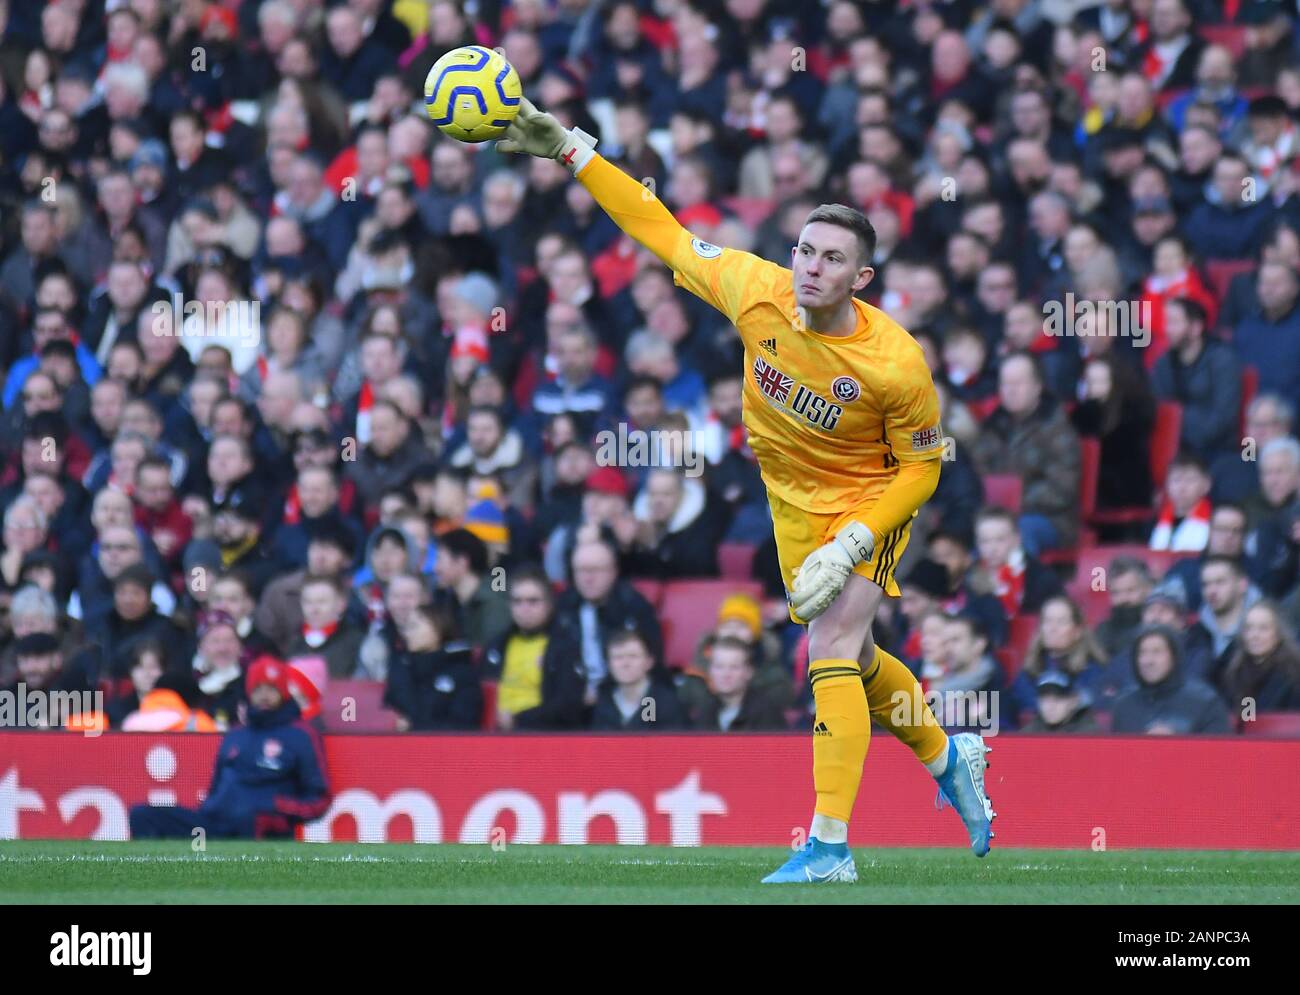 LONDON, ENGLAND - JANUARY 18, 2020: Dean Henderson of Sheffield pictured during the 2019/20 Premier League game between Arsenal FC and Sheffield United FC at Emirates Stadium. Stock Photo